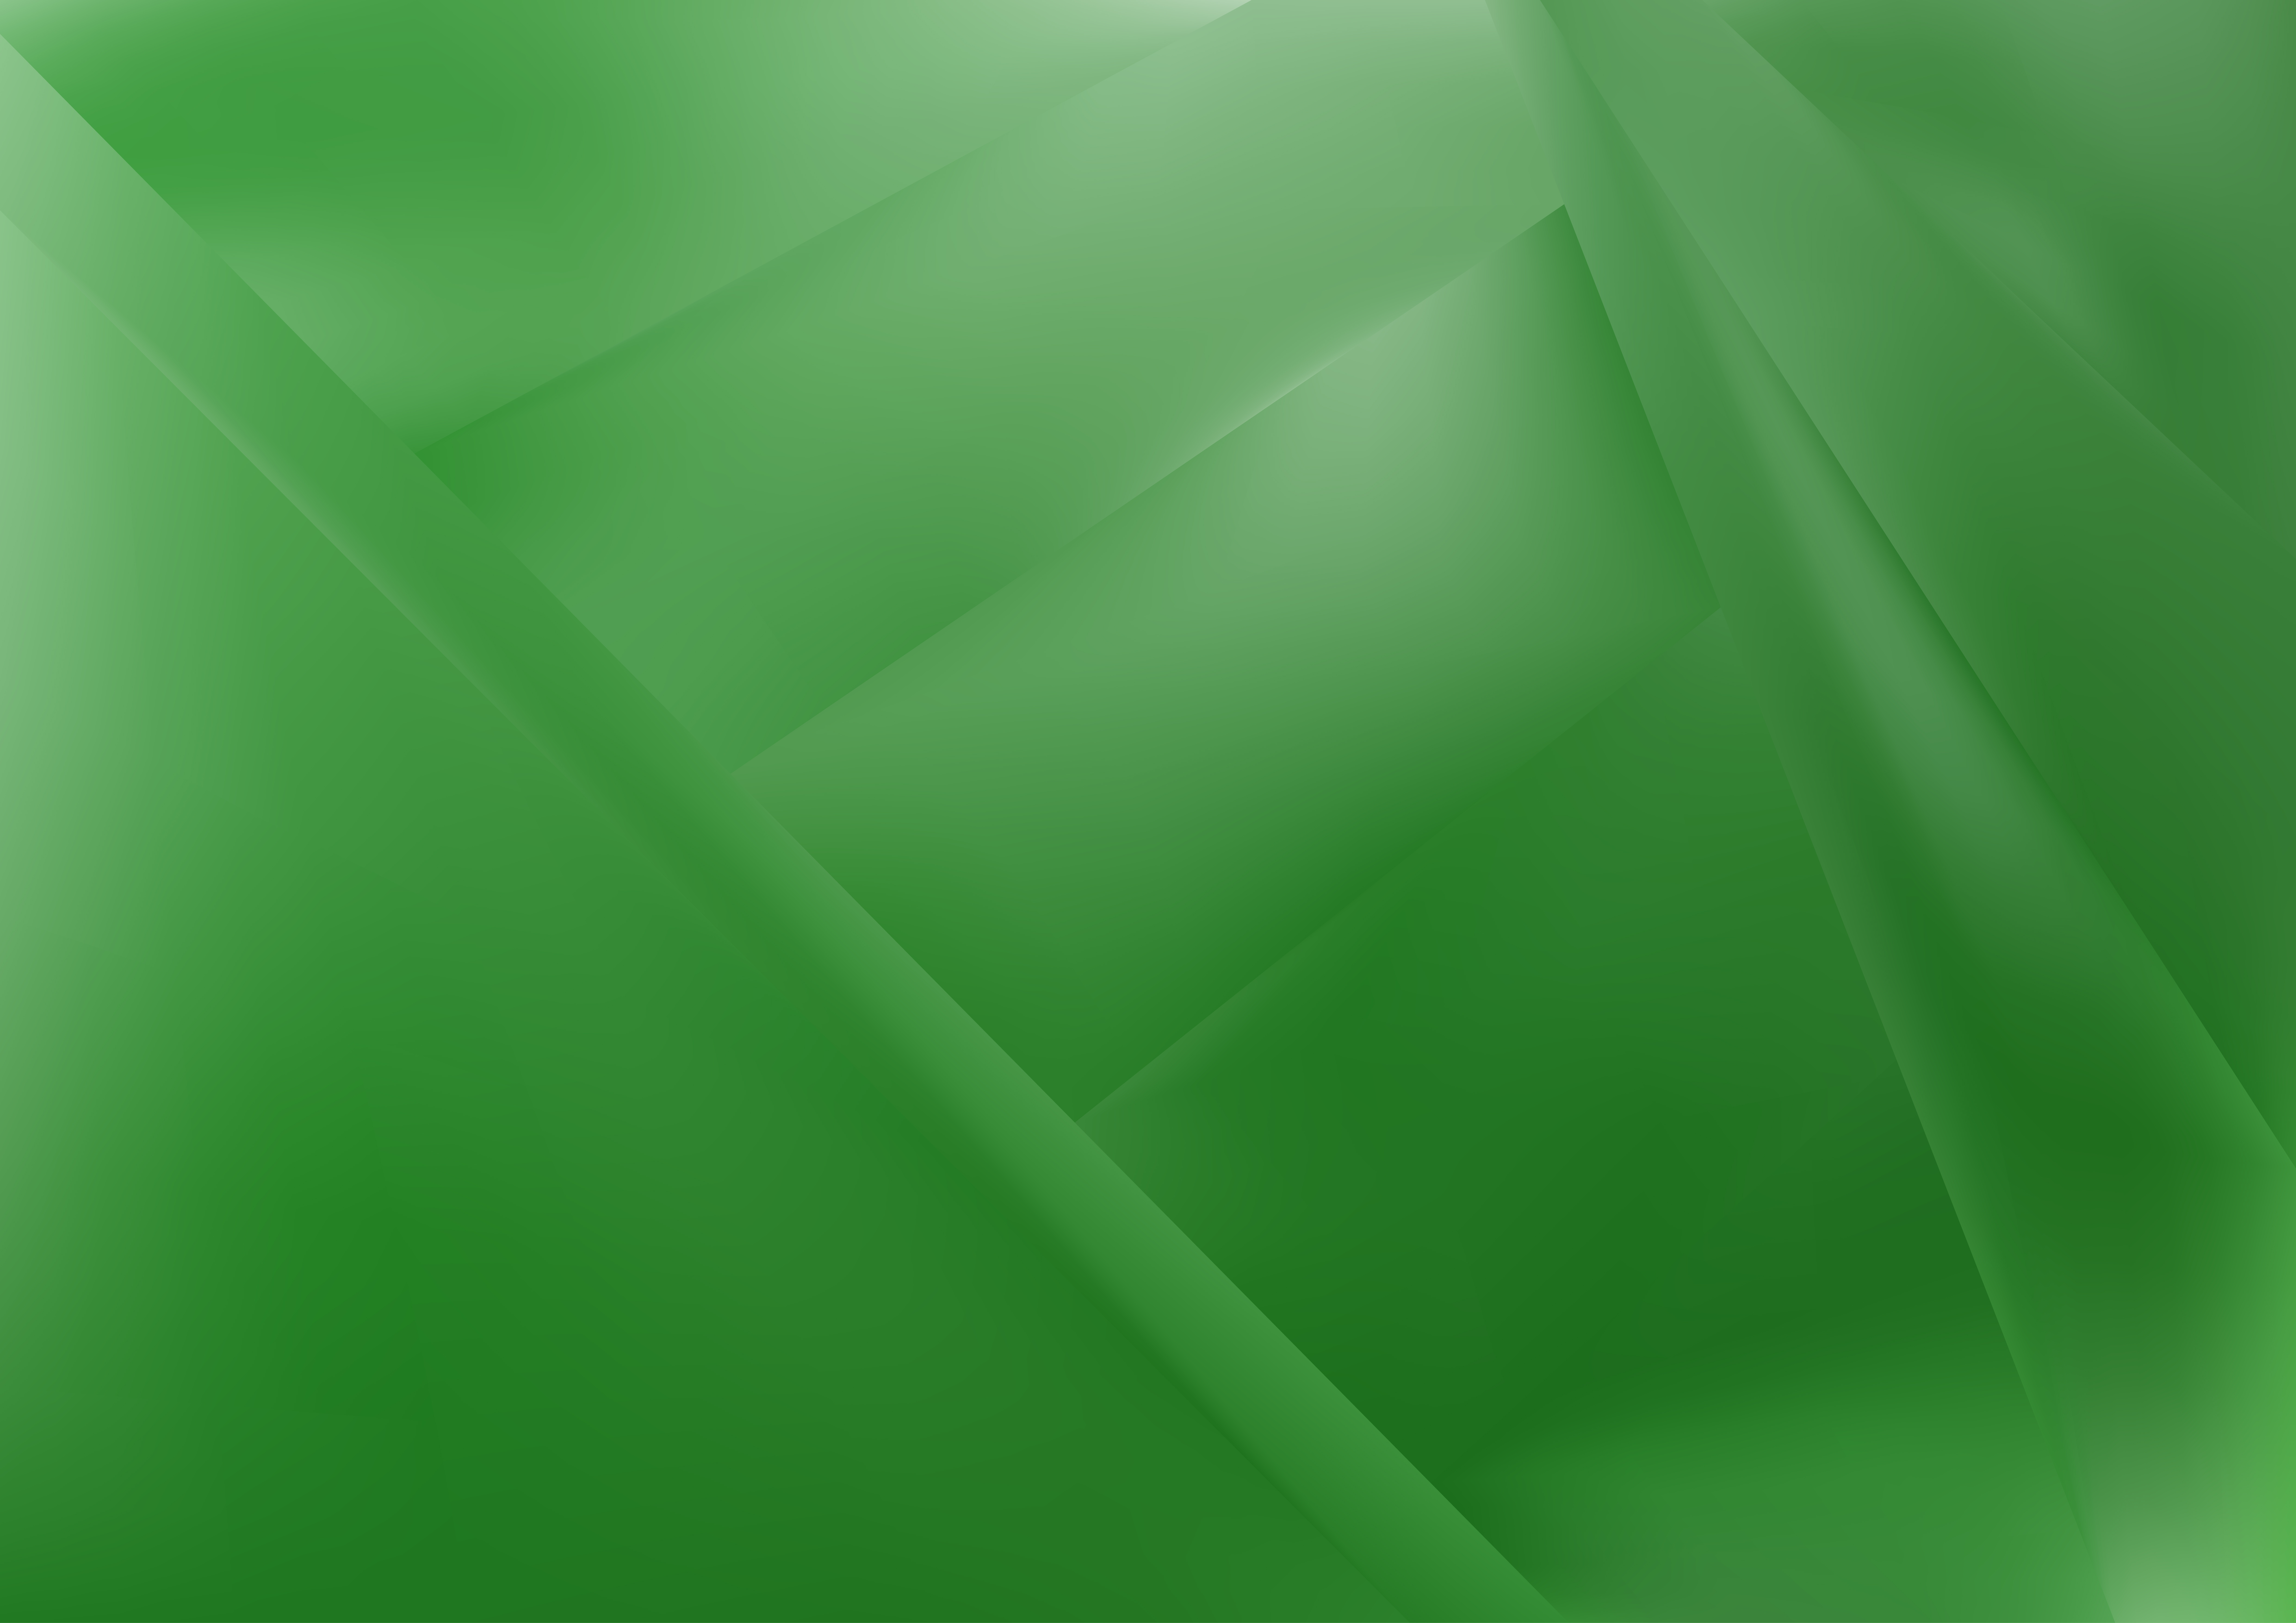 Free Simple Green Background Design